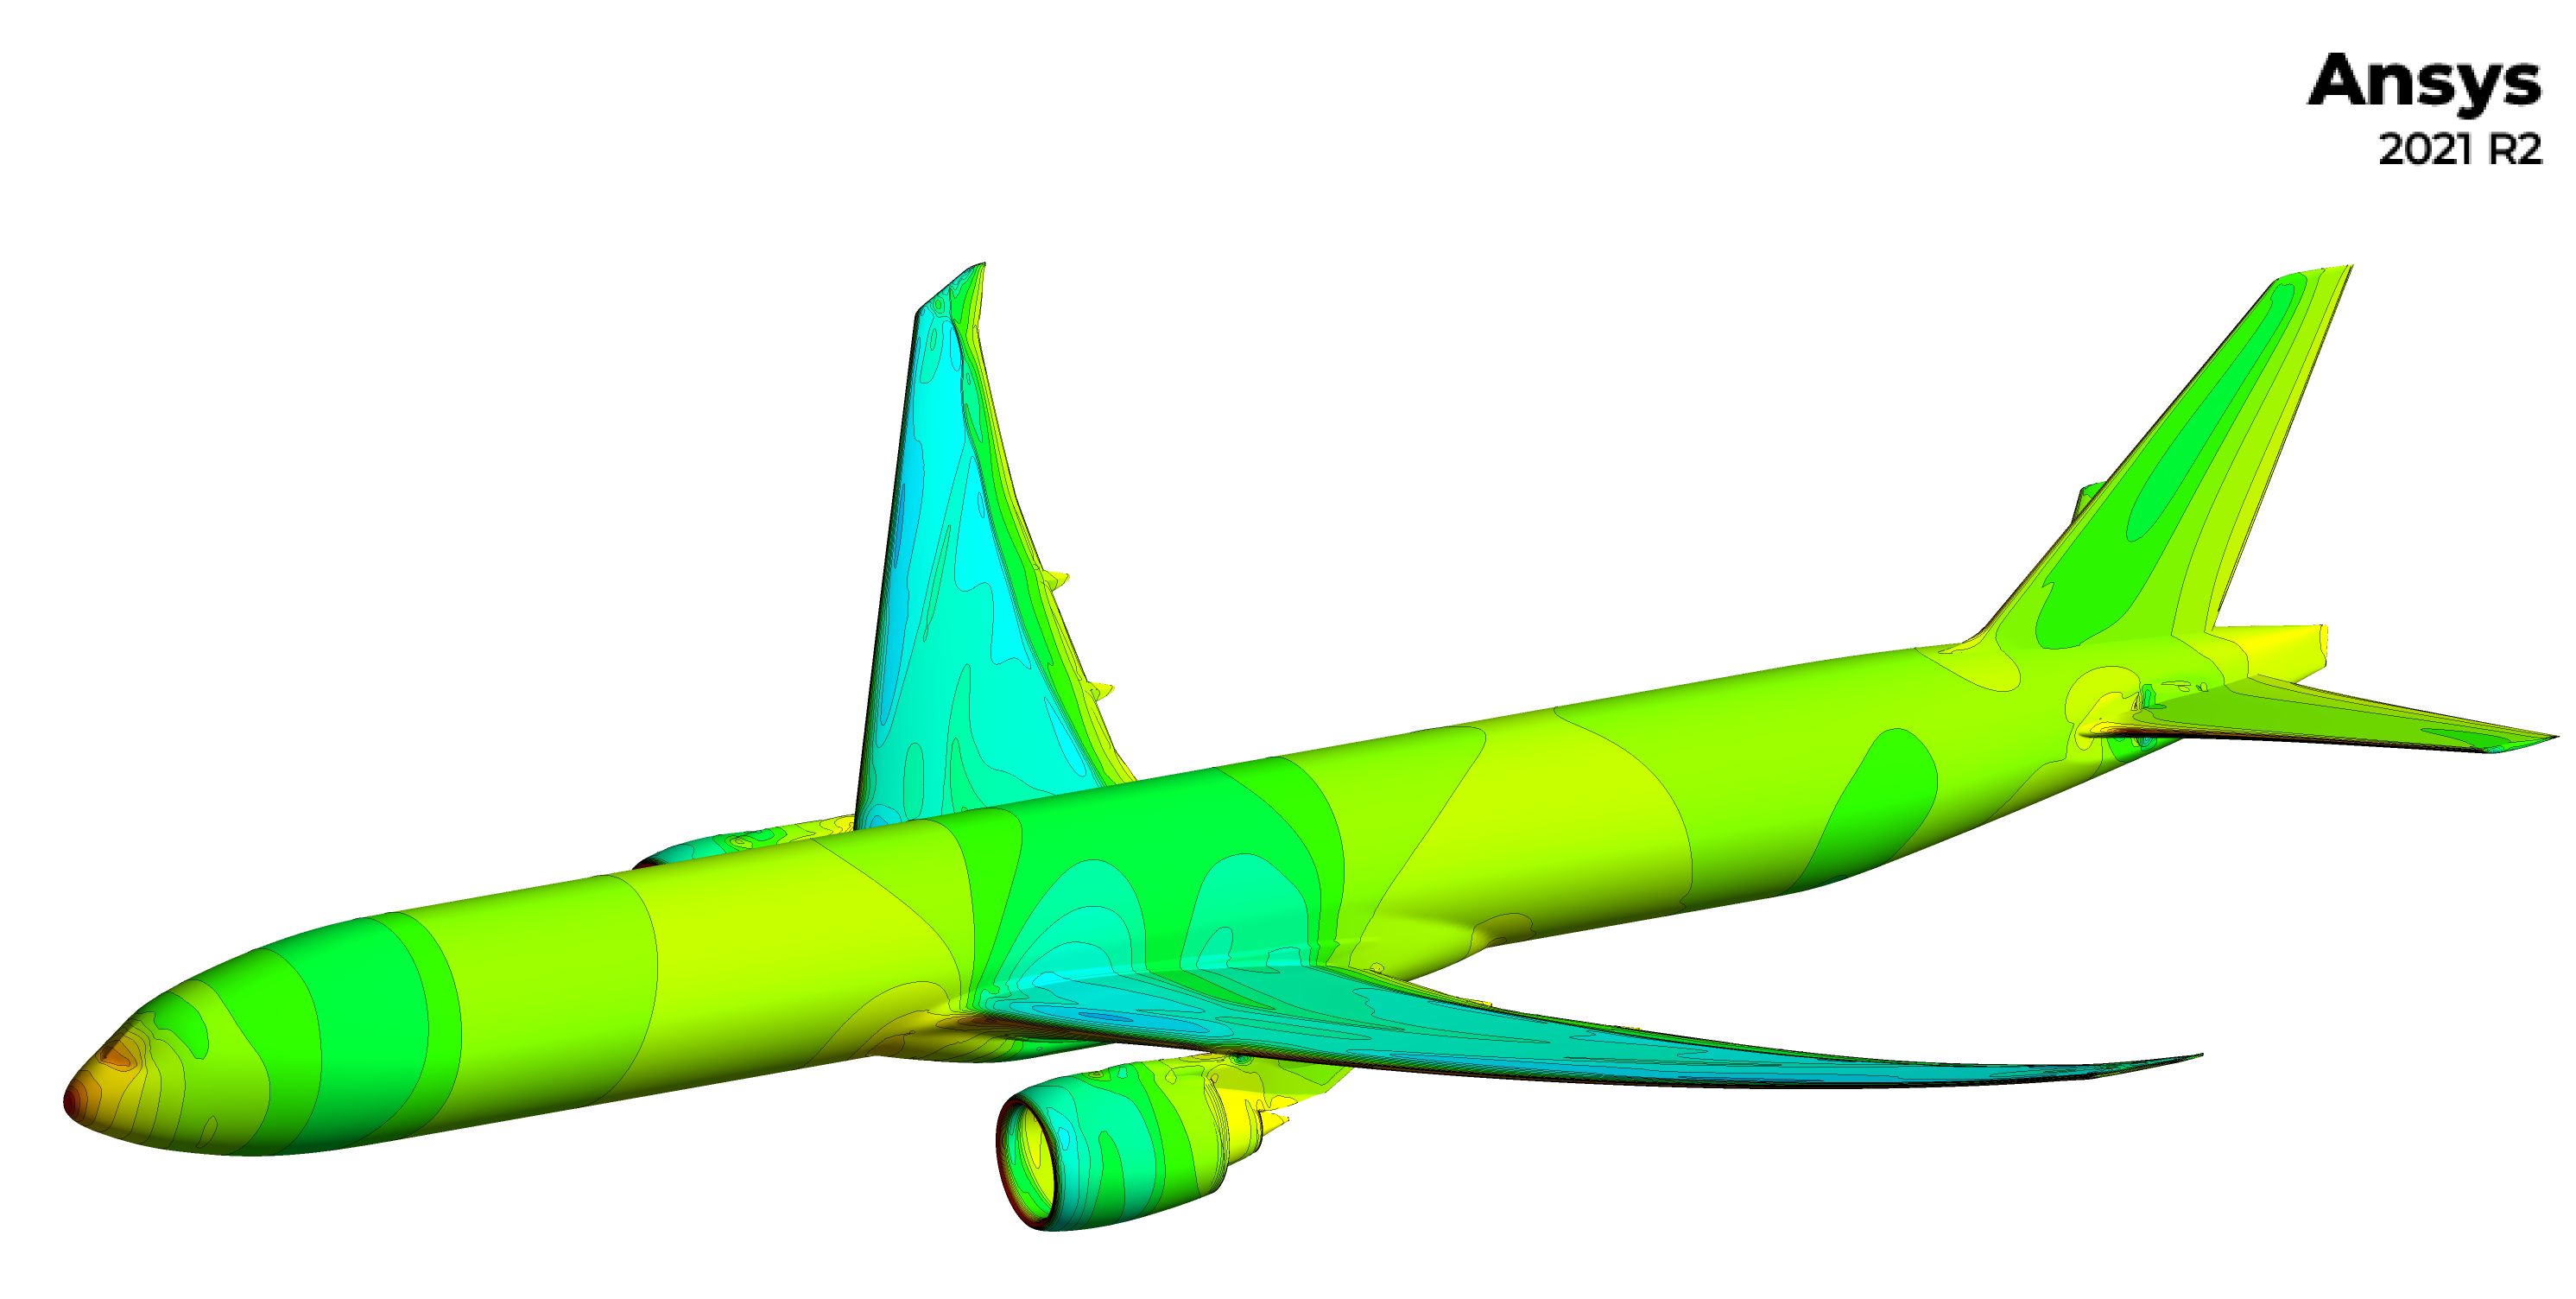 CFD calculation applied to the B777